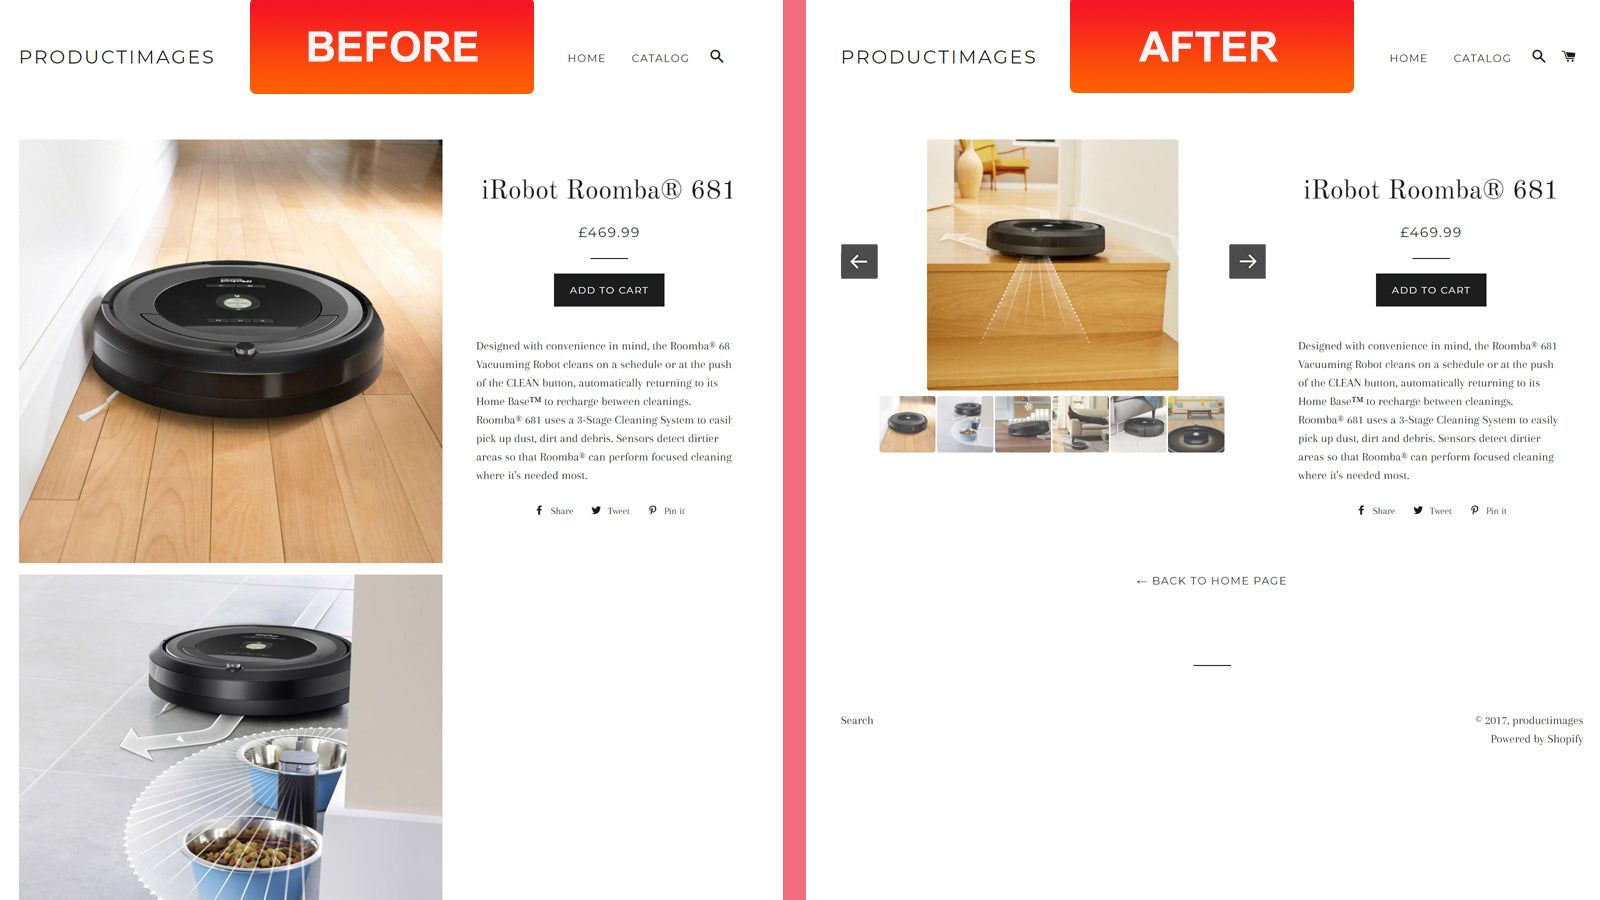 Product image slider - without our app and with our app